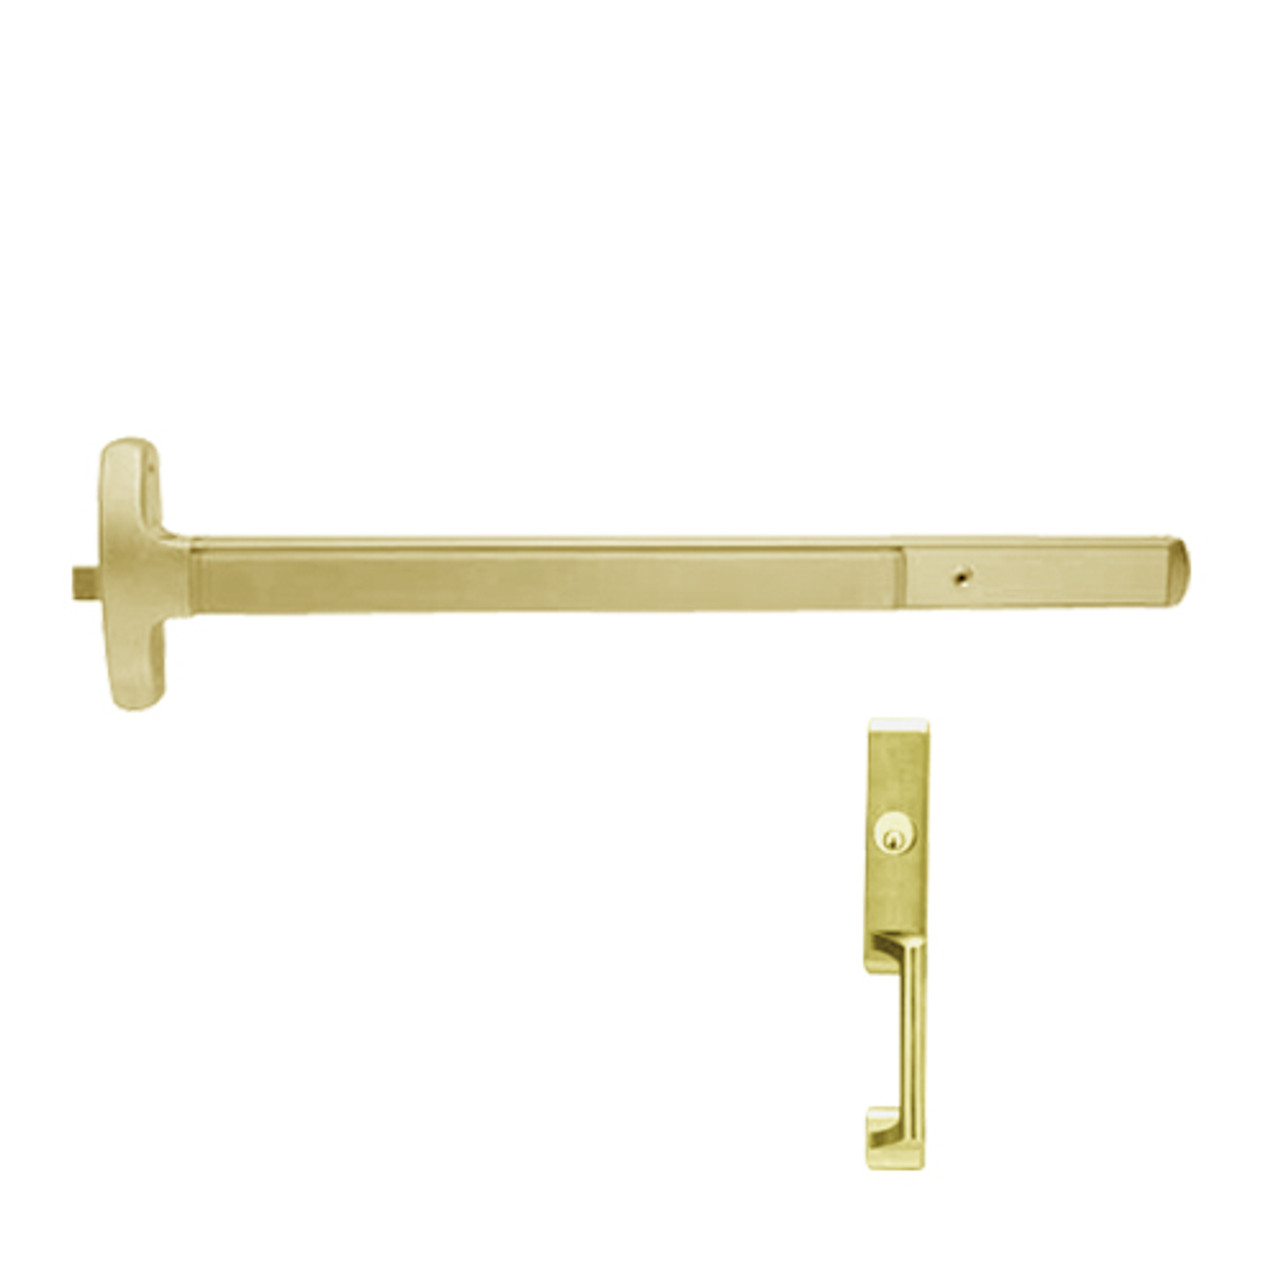 24-R-NL-US4-4-LHR Falcon Exit Device in Satin Brass